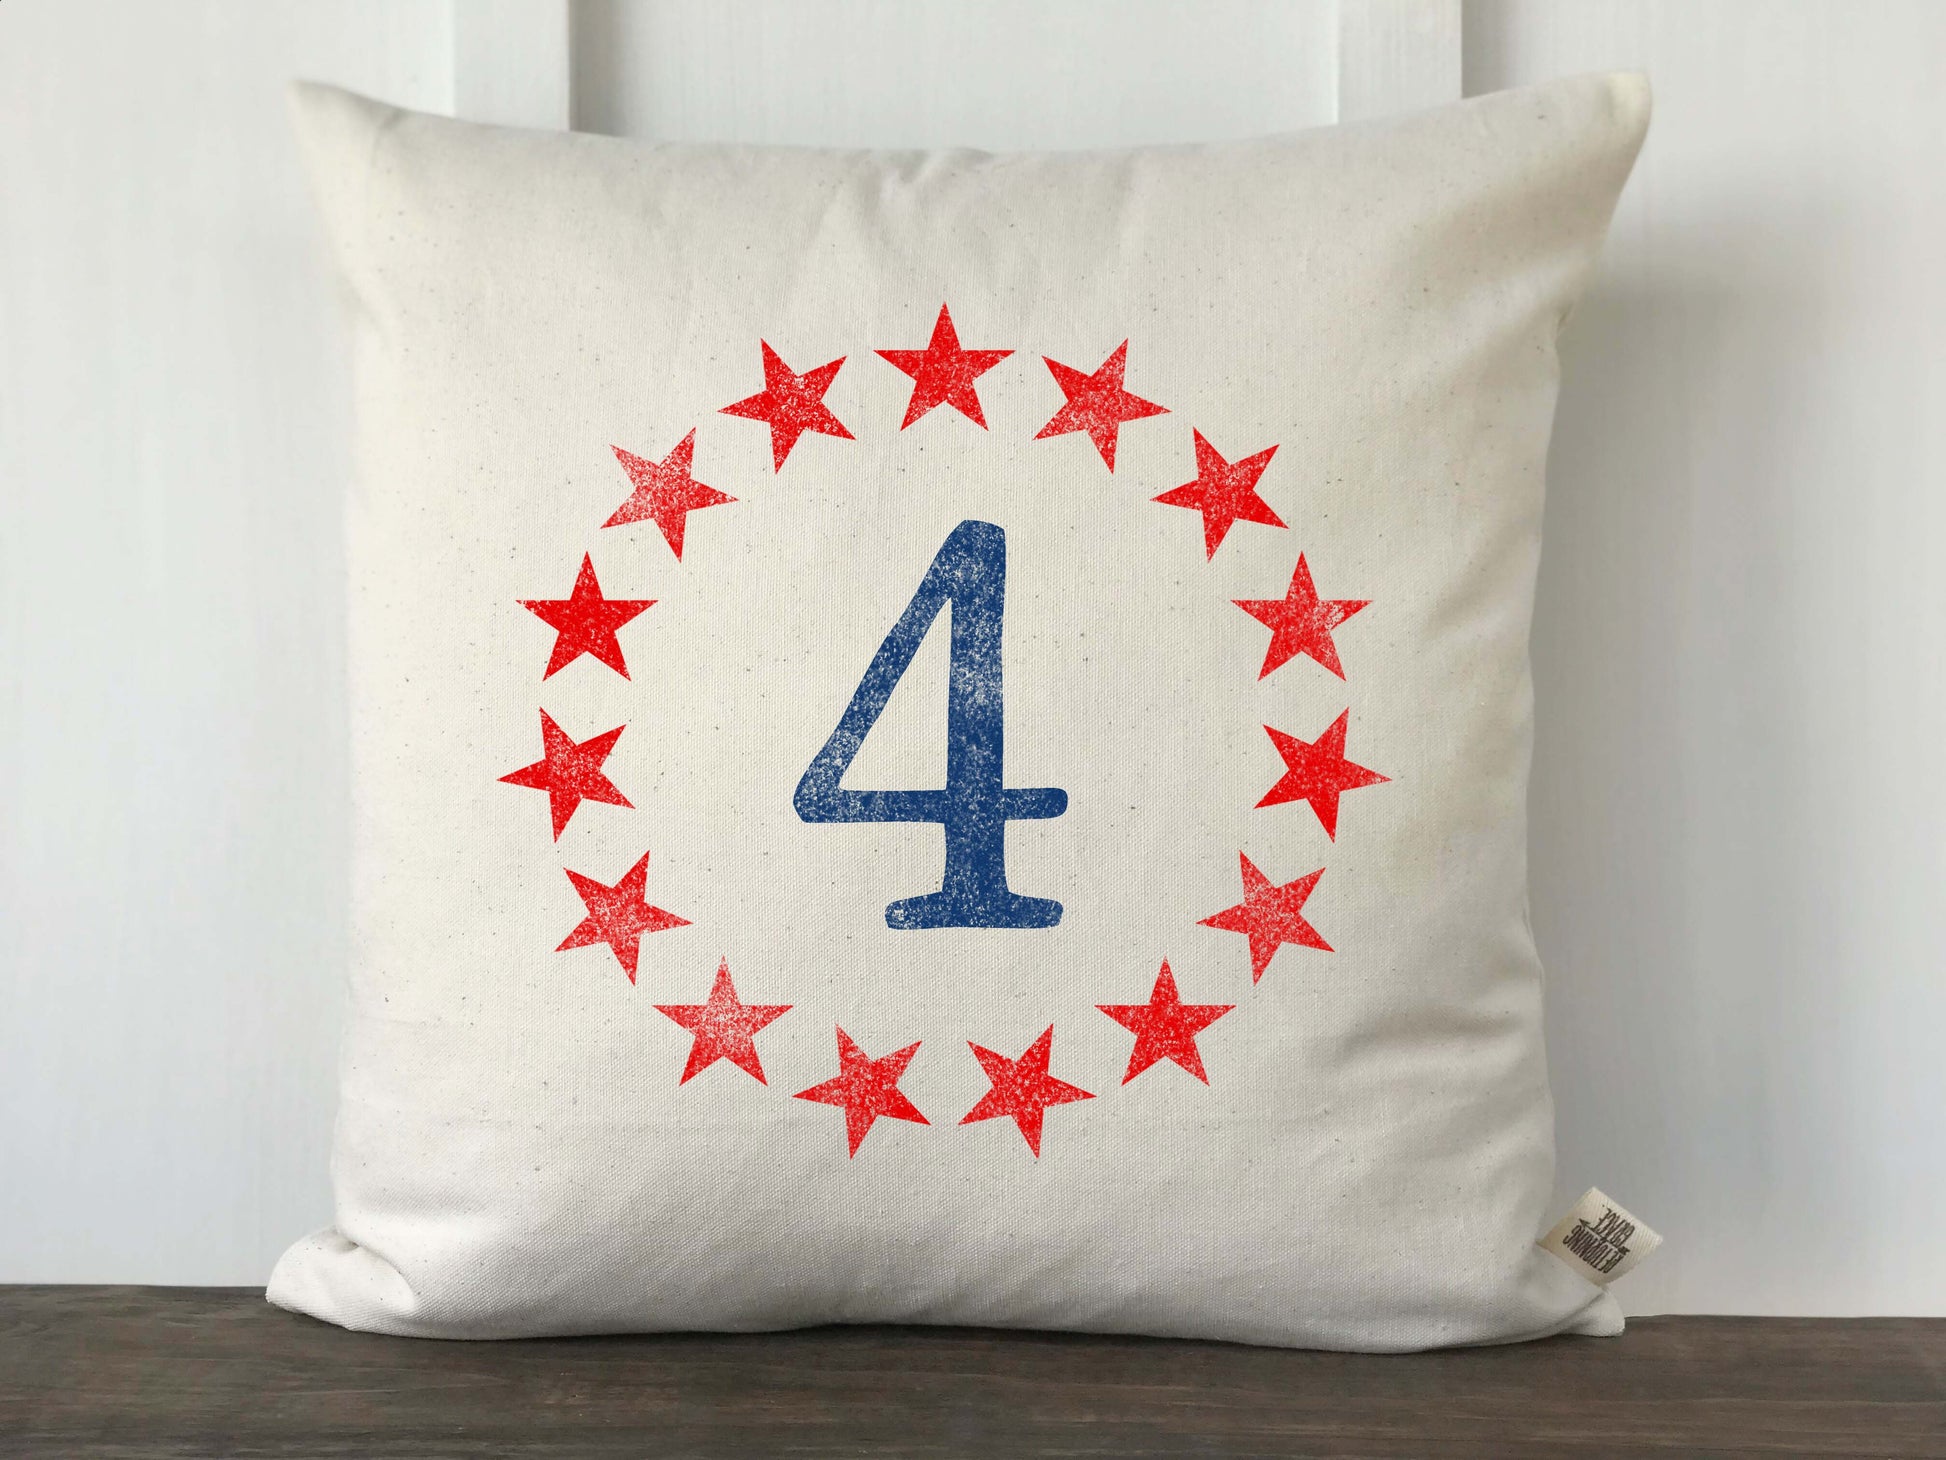 Circle Stars with 4 Patriotic Pillow Cover - Returning Grace Designs